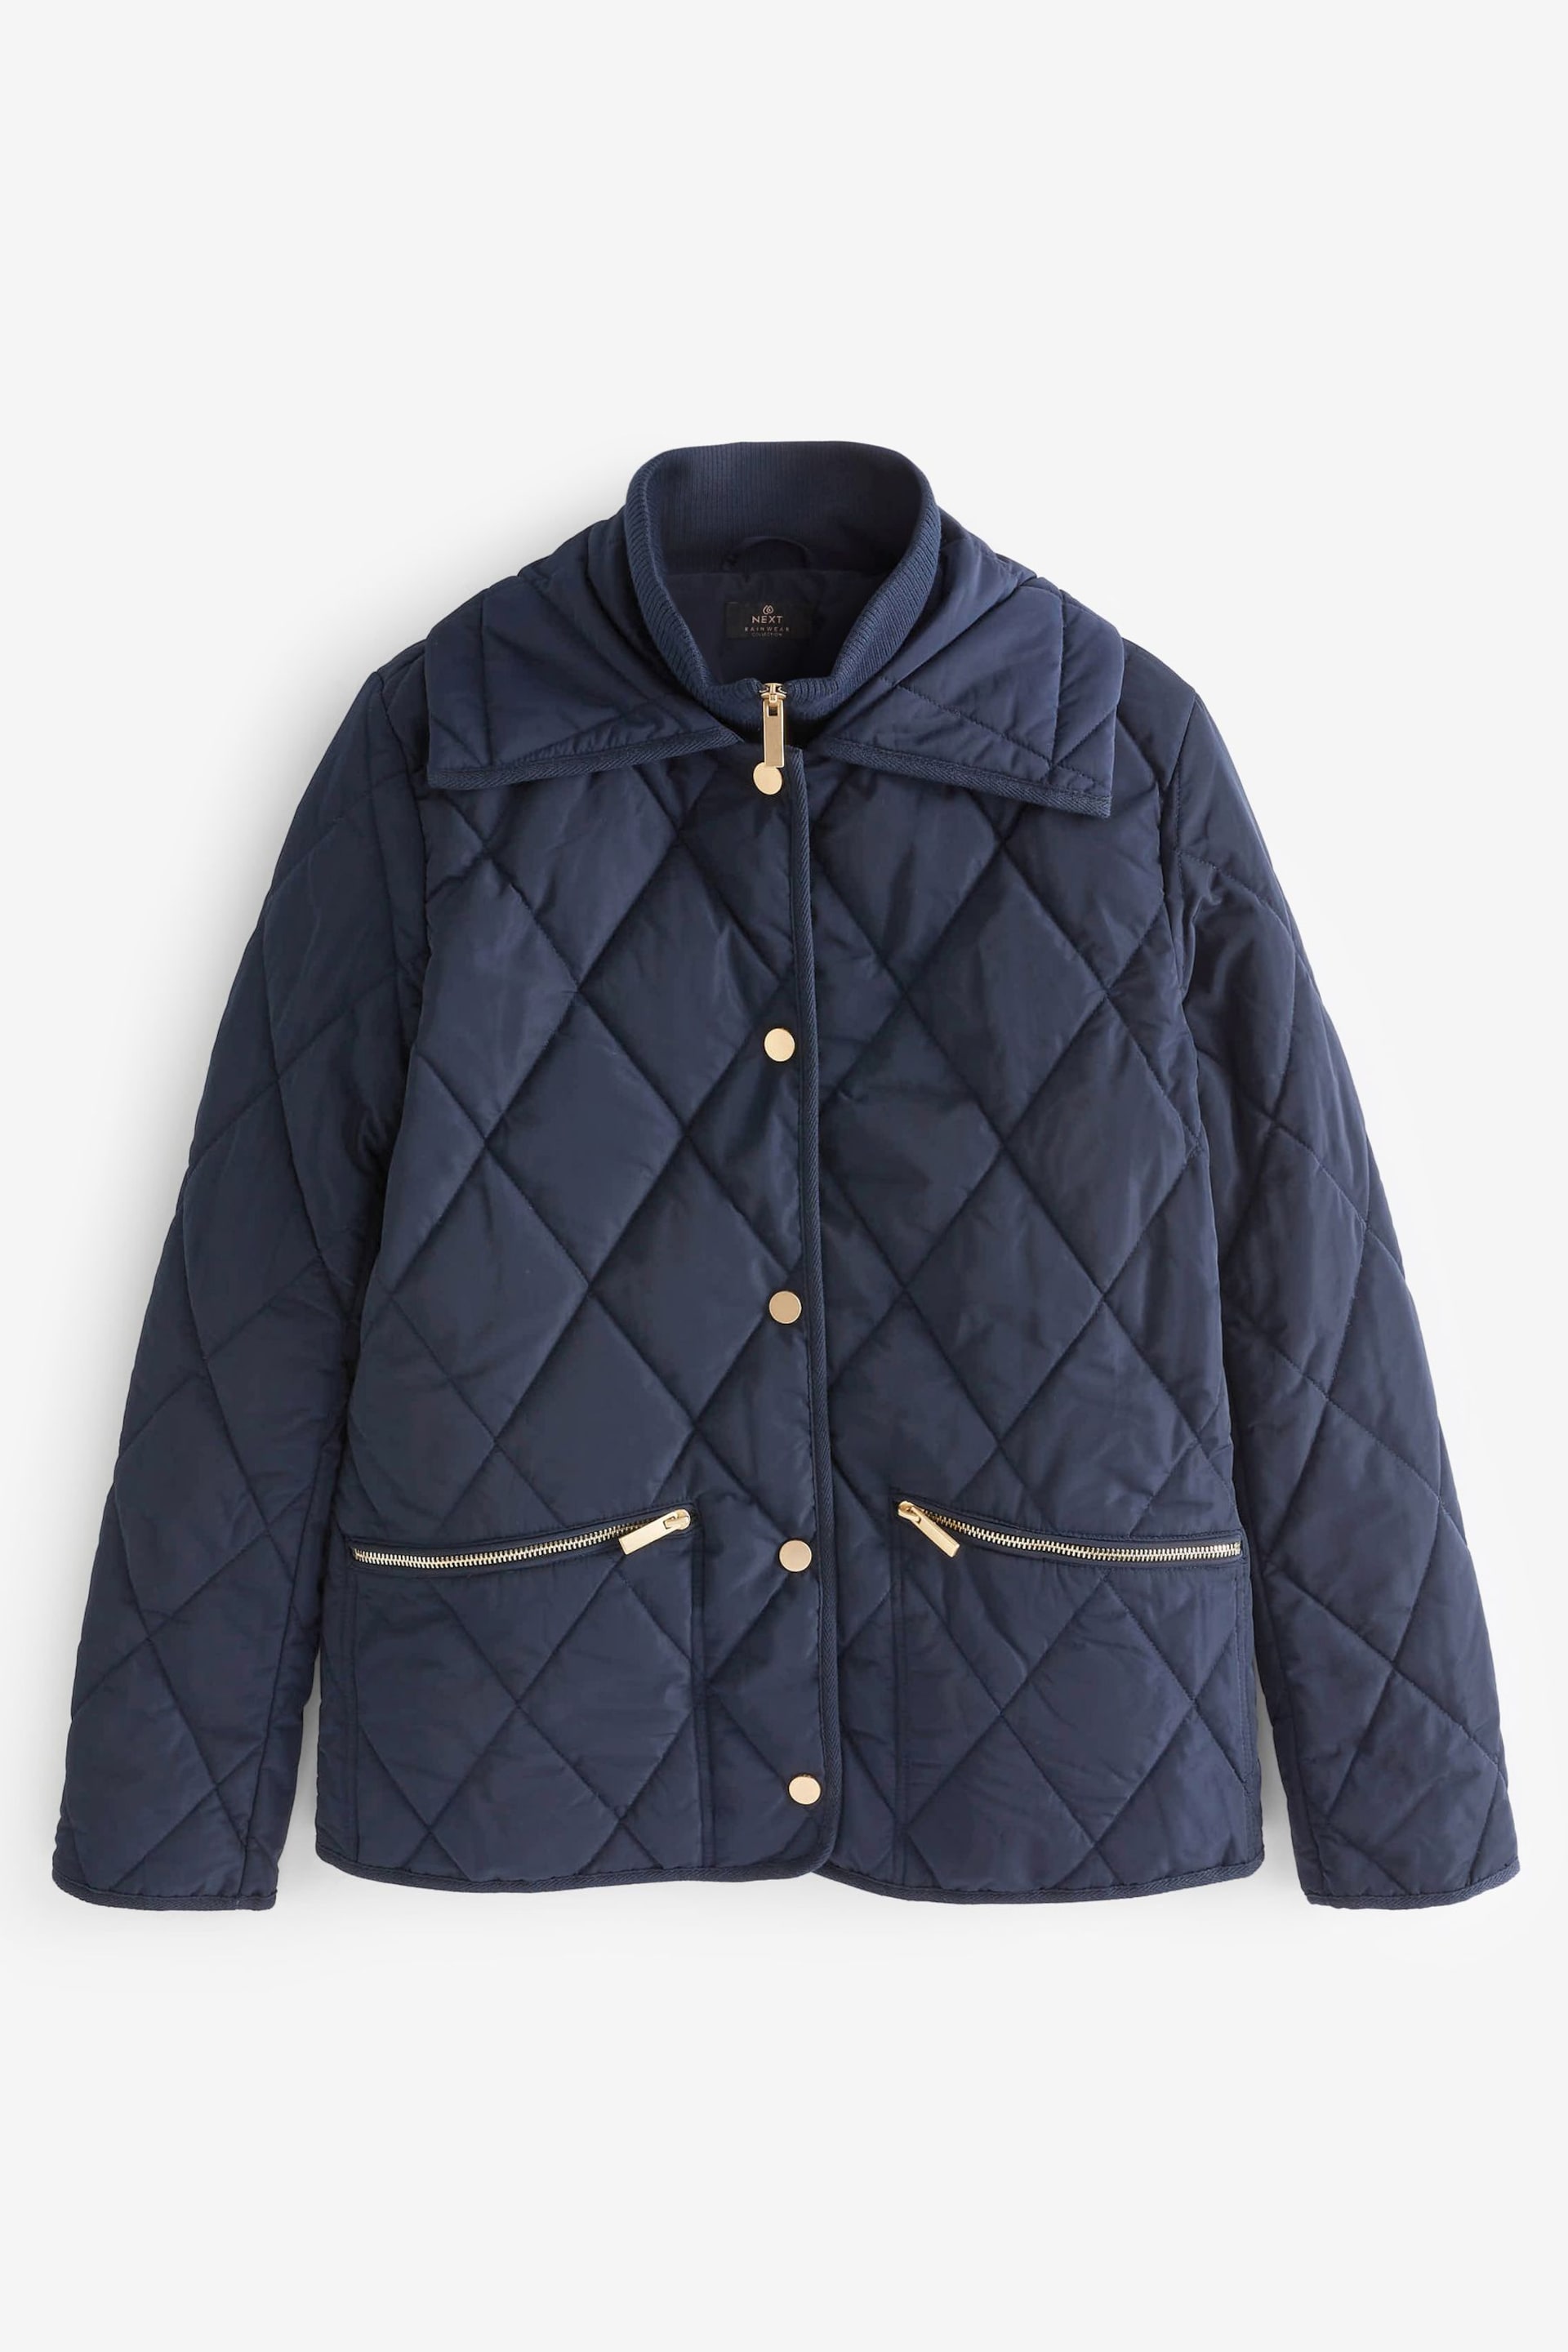 Navy Blue Shower Resistant Quilted Jacket - Image 5 of 6